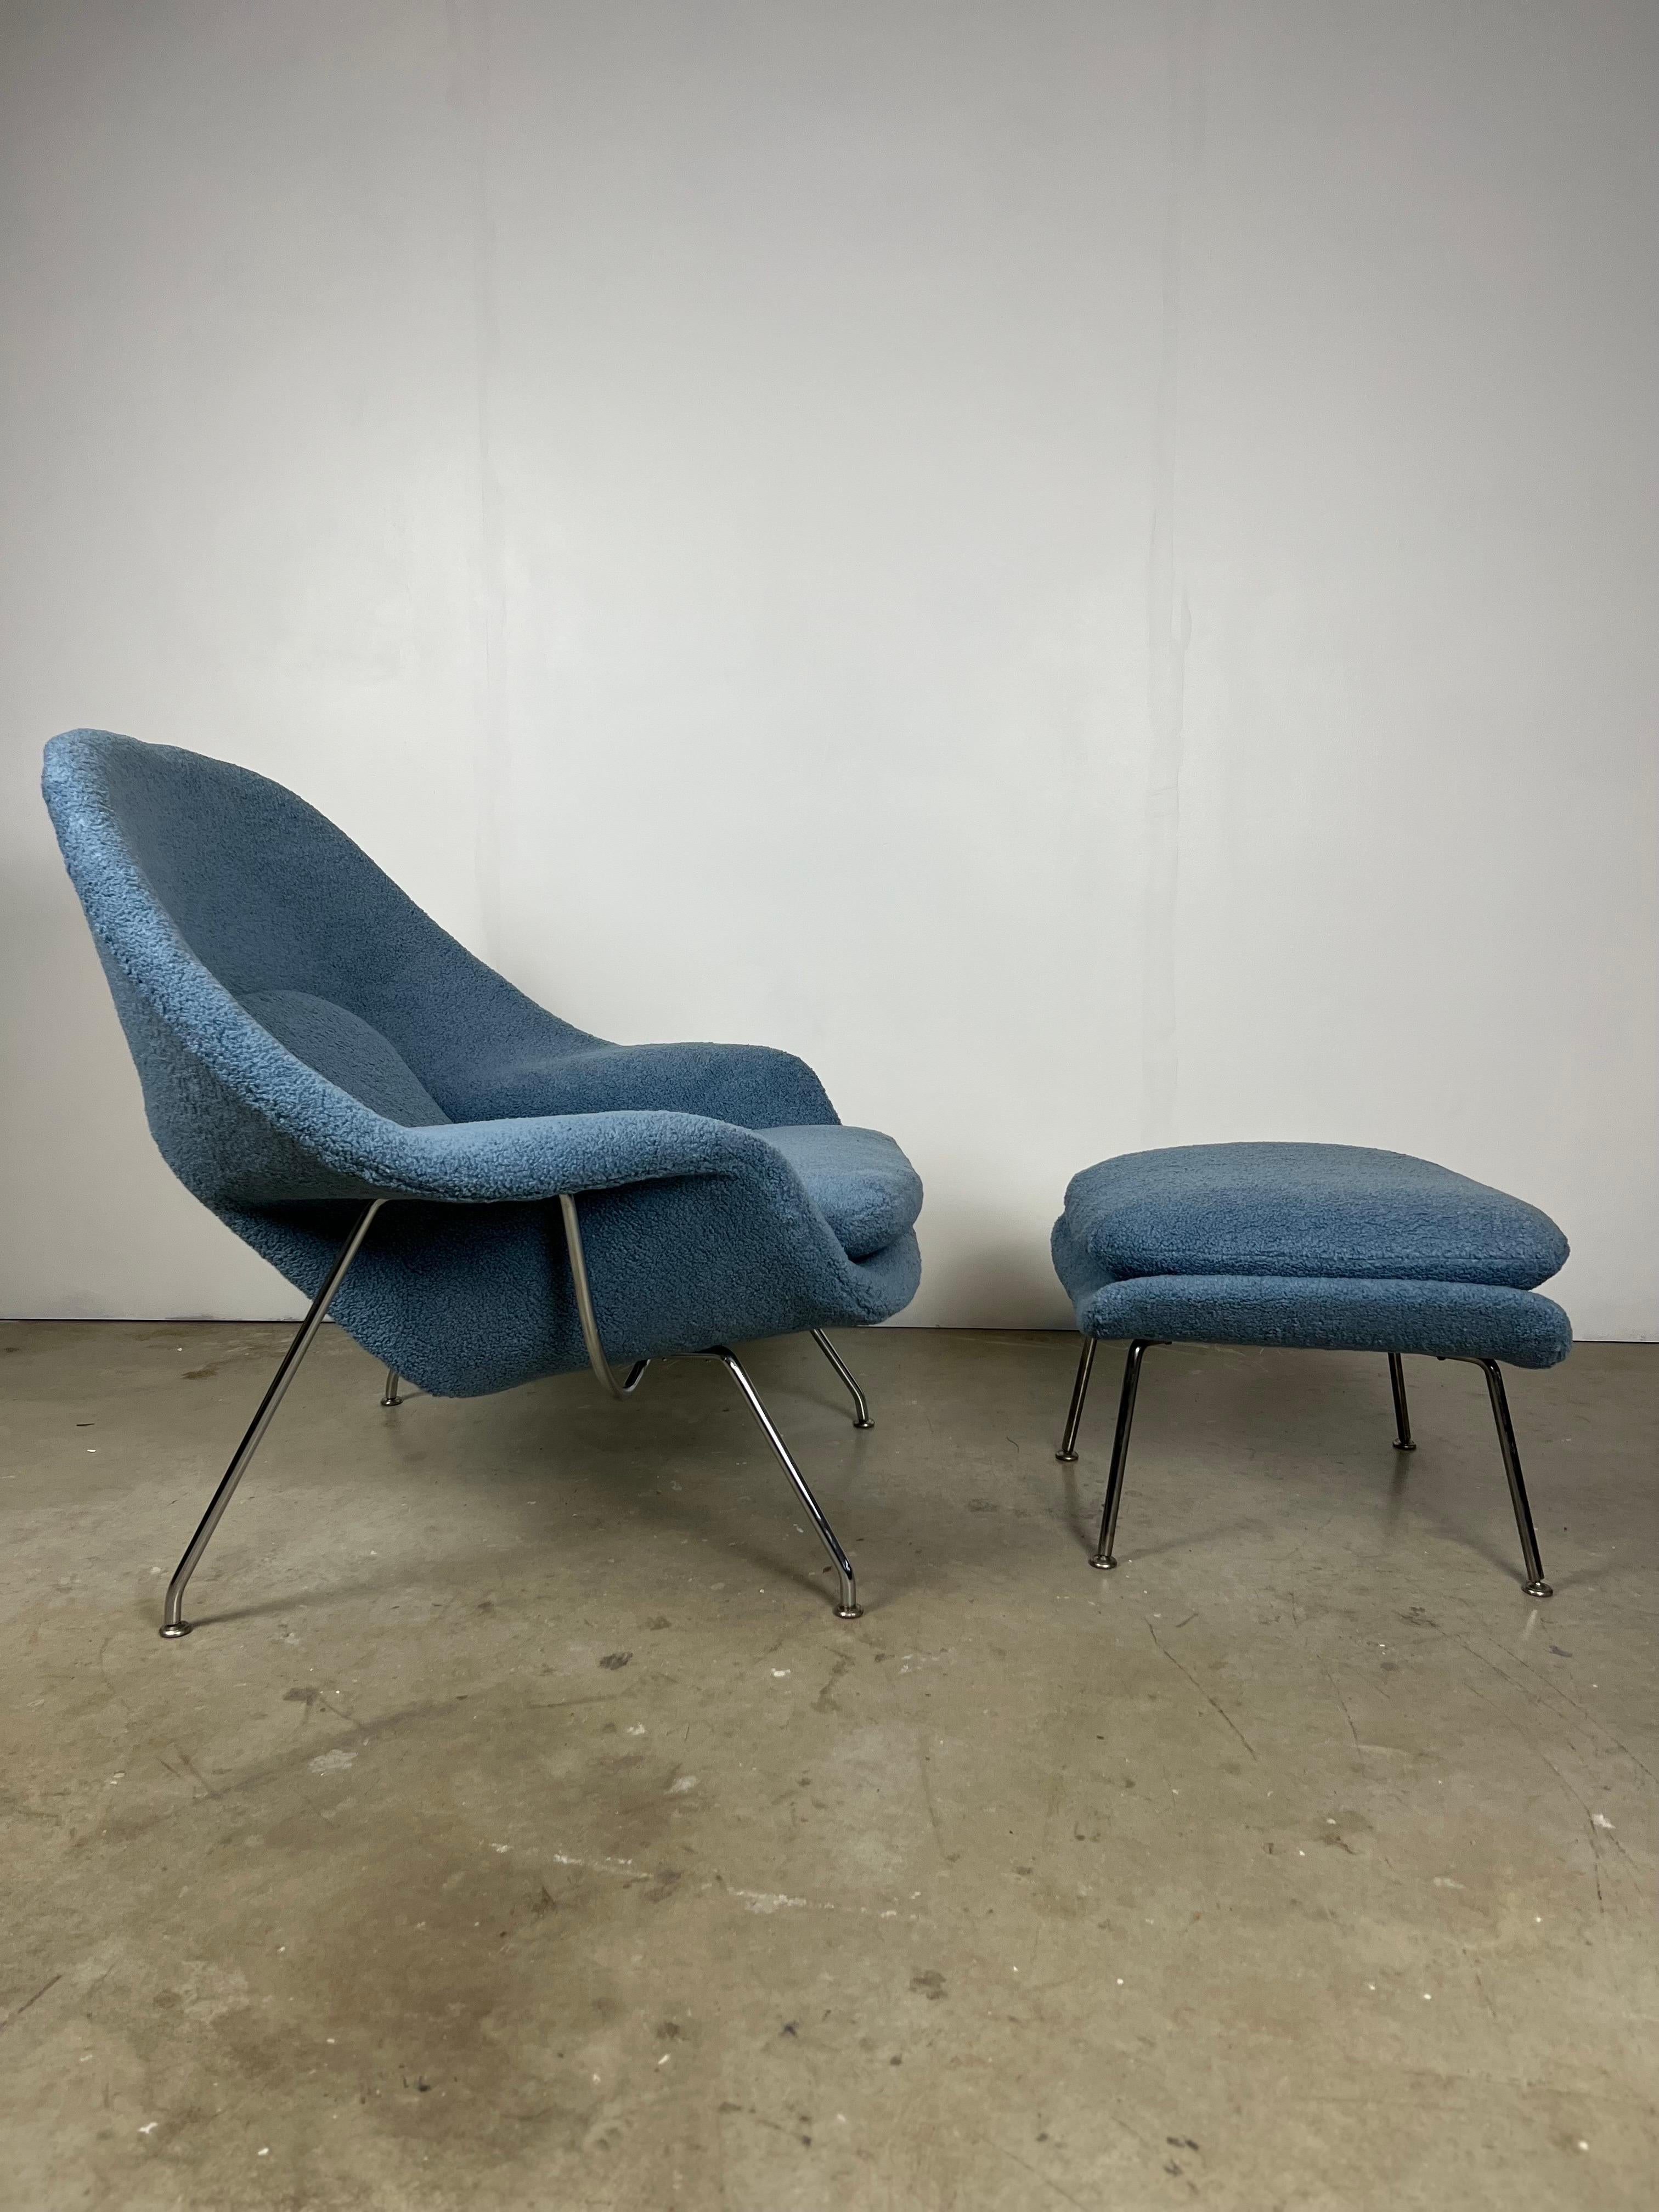 Eero Saarinen for Knoll Womb chair and ottoman. Reupholstered in “Puff” upholstery by artist Nick Cave and Manufactured by Knoll Textiles. Chair and ottoman both retain original tags. Minor wear to the underneath of the frame. 

Ottoman is 26 wide,